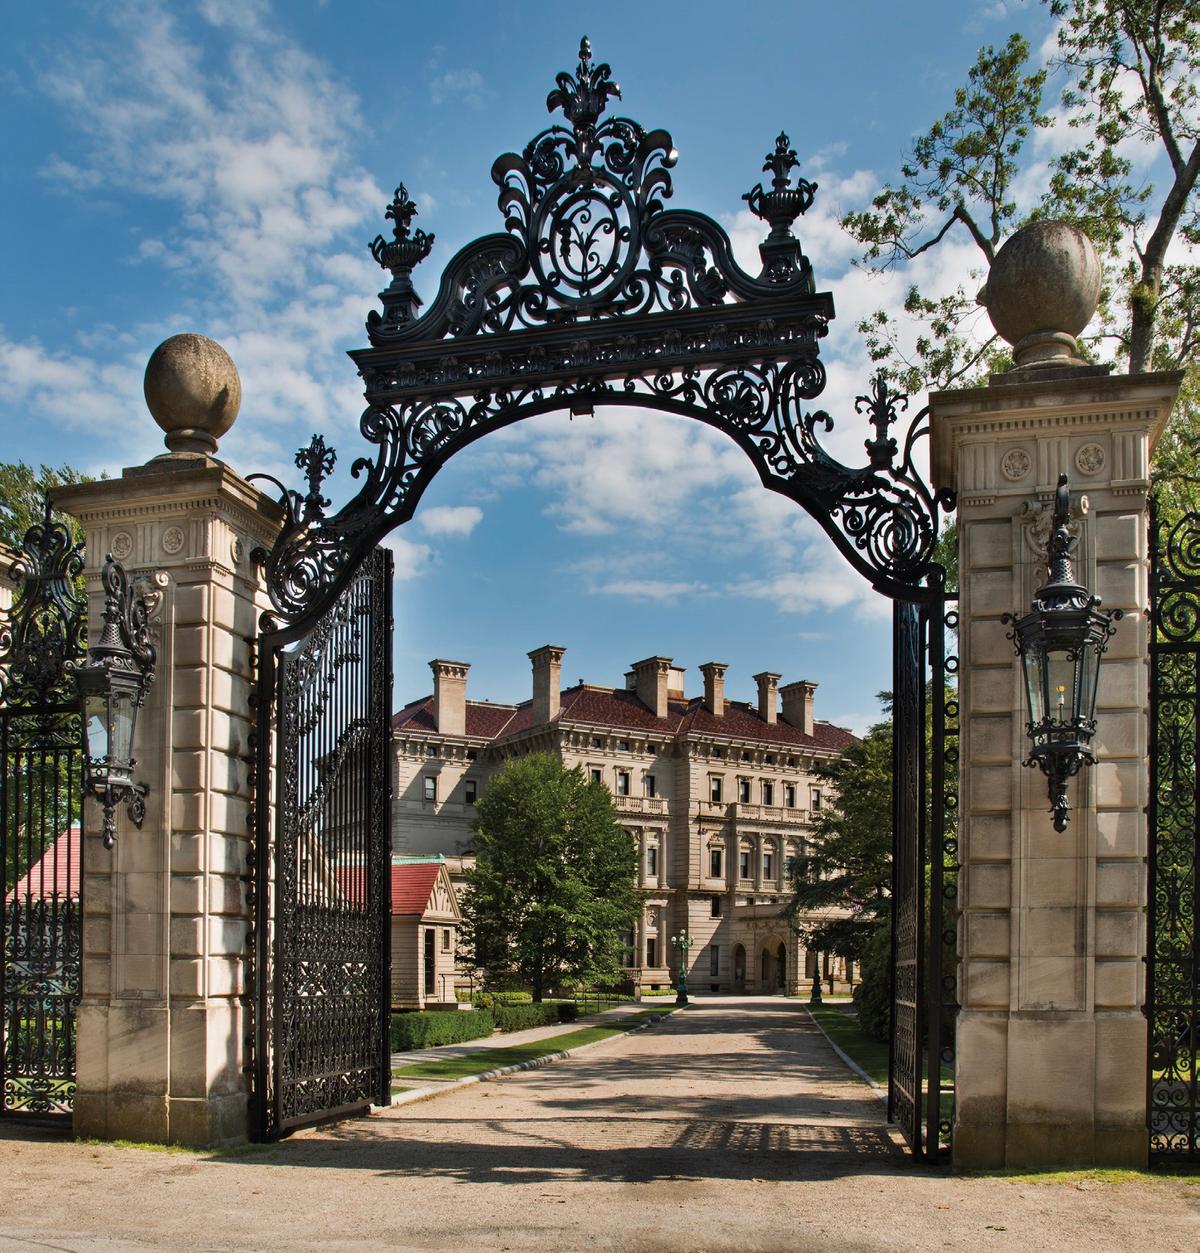 The entrance gates, manufactured by the William H. Jackson Company of New York, rise 30 feet above the driveway and feature a monogram of Cornelius Vanderbilt’s initials as well as acorns<br/>and oak leaves— symbolic of the Vanderbilt family. (Courtesy of The Preservation Society of Newport County)